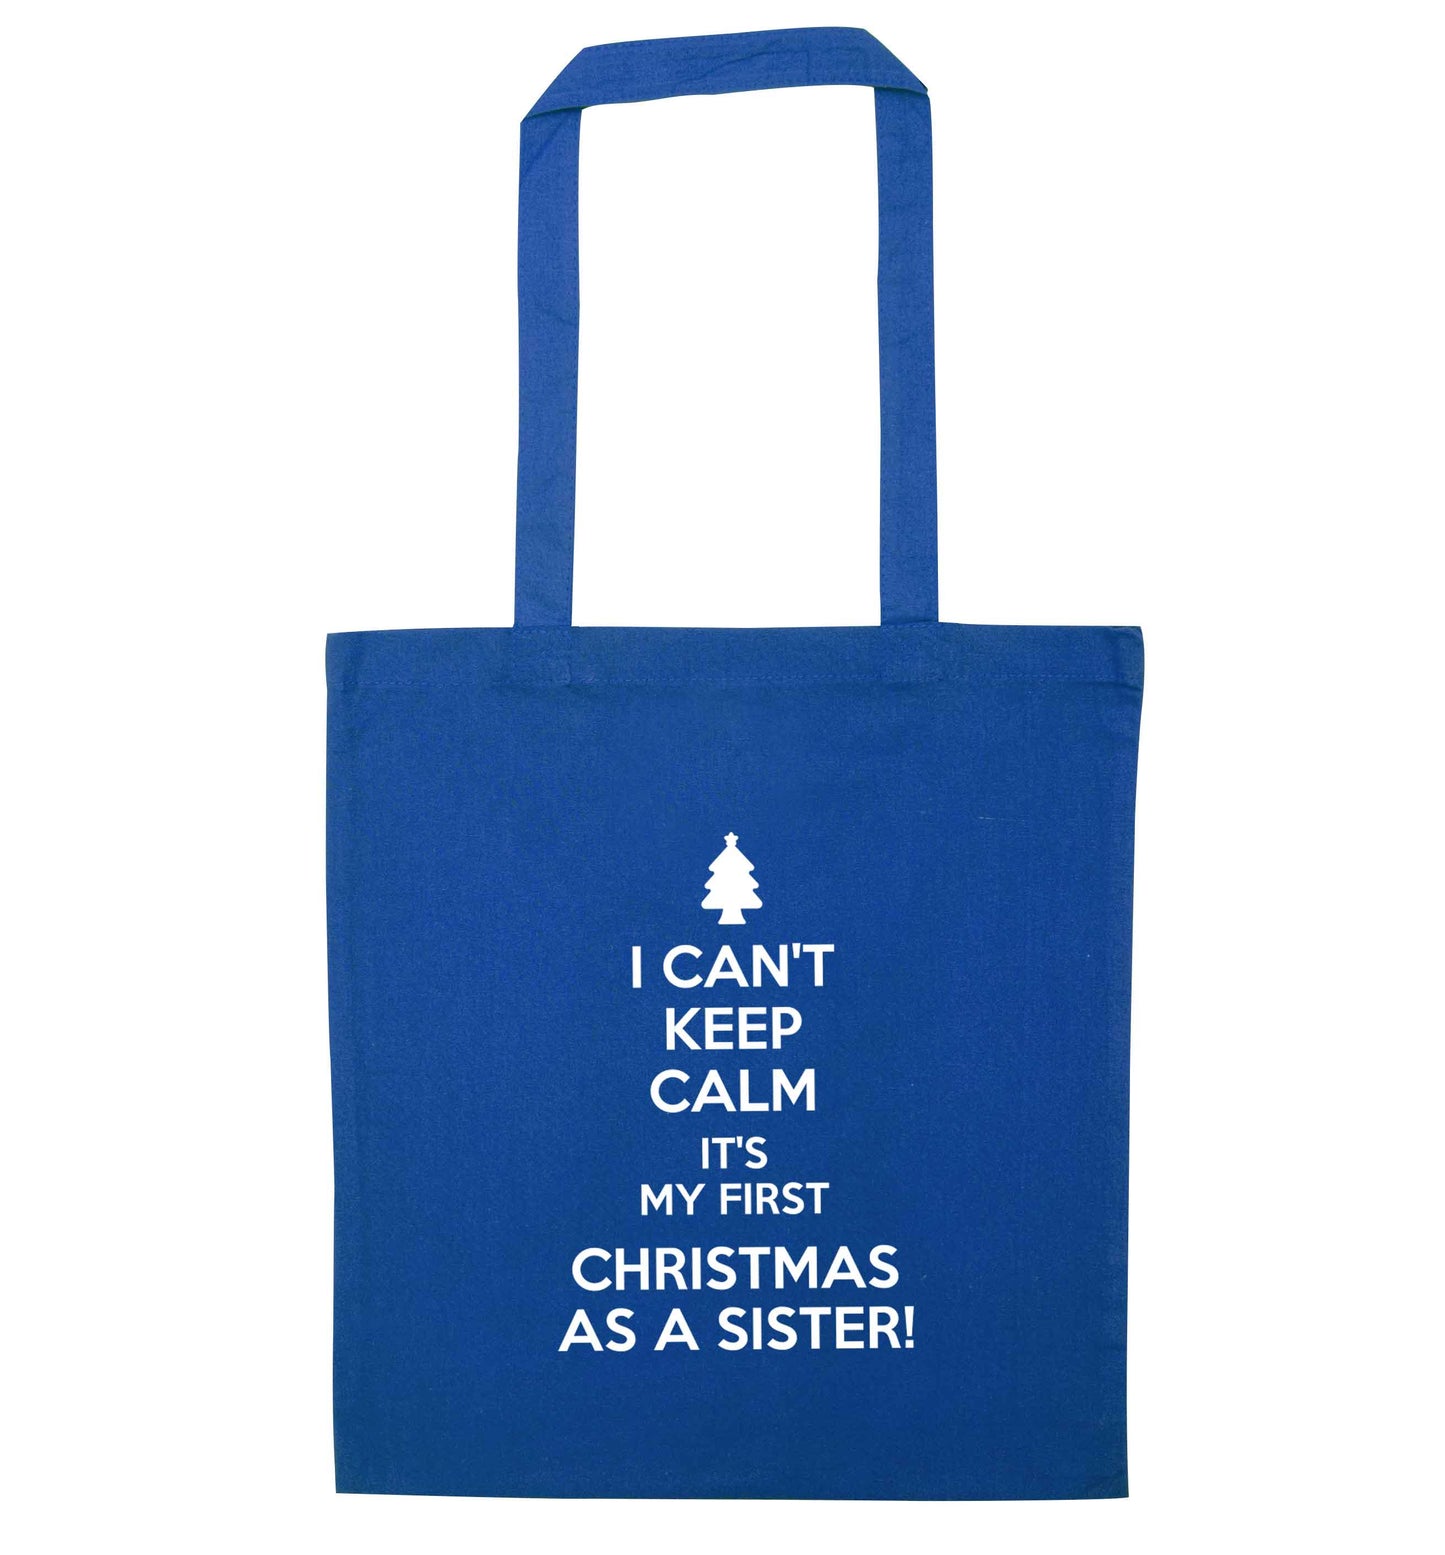 I can't keep calm it's my first Christmas as a sister! blue tote bag